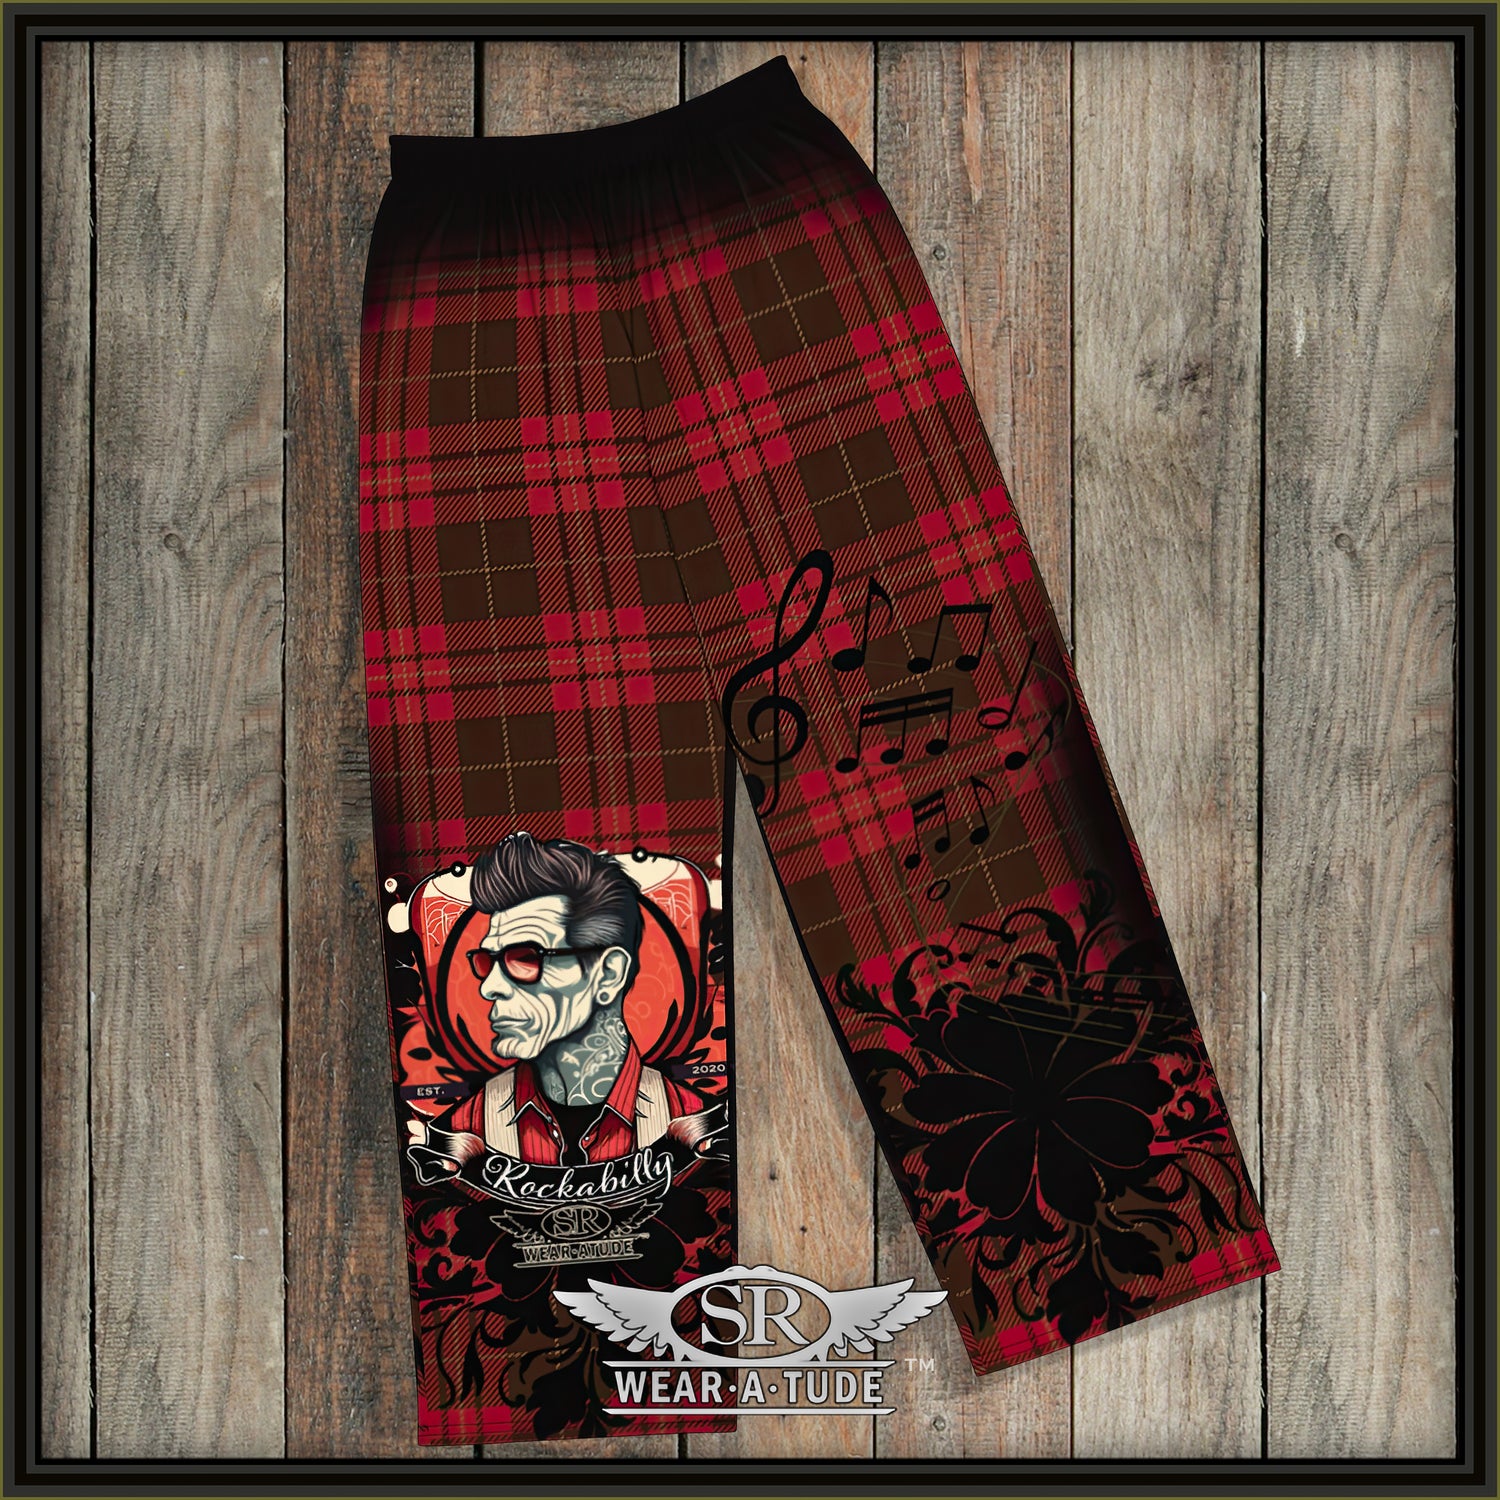 Rockabilly Joe, our wide leg Lounge Pants – a unisex garment that seamlessly merges comfort with the spirit of Rockabilly style. The red and black plaid pattern is a true throwback of comfort and the Rockabilly Joe decal shows off your style. 